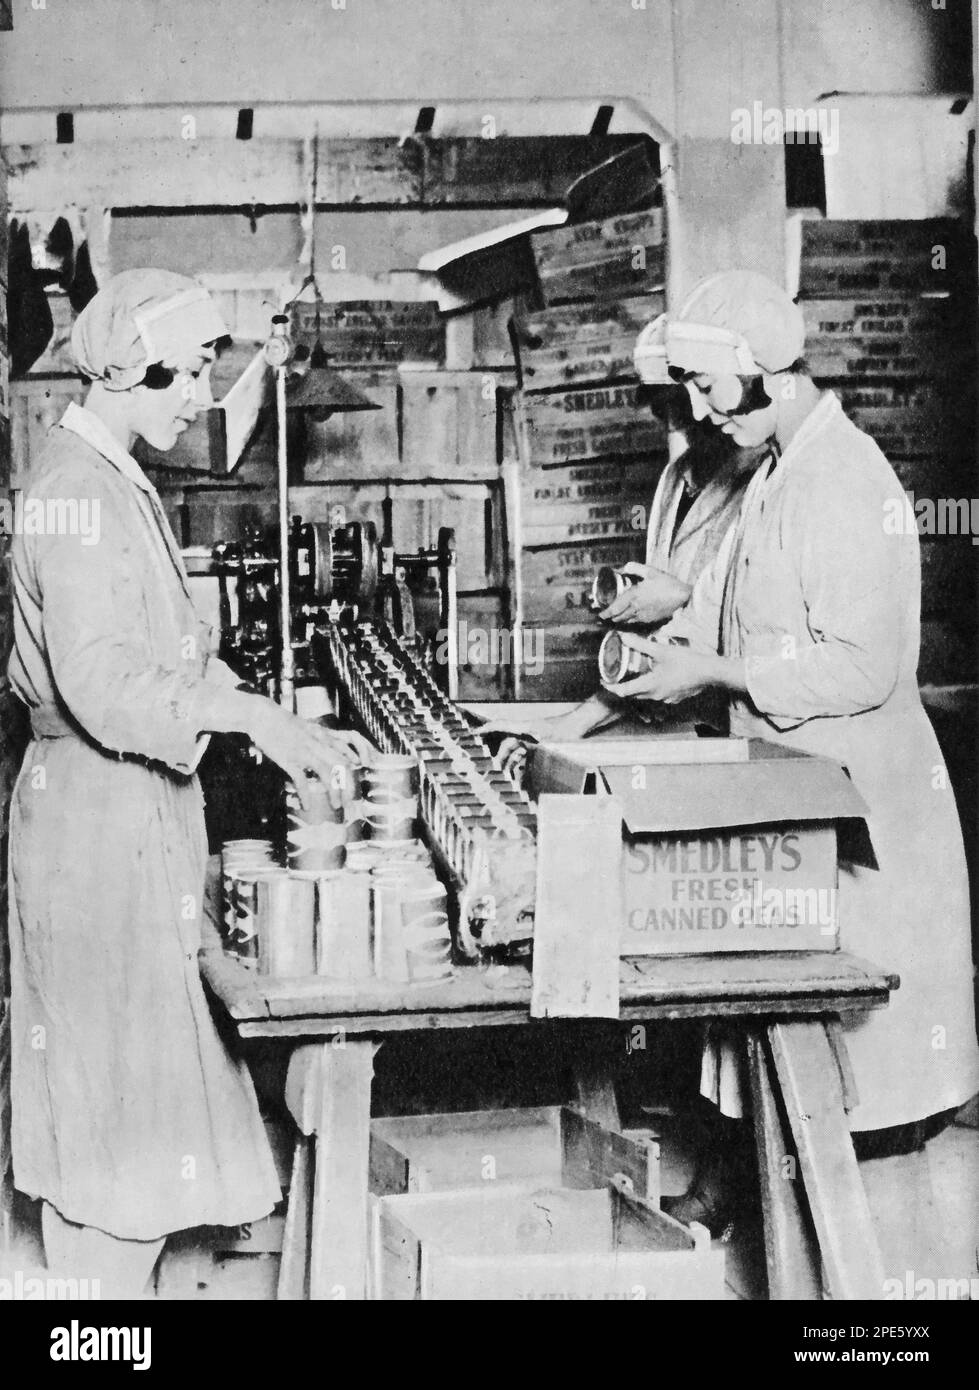 Packing and labelling canned peas at the Smedley's factory, c1933. Smedley's was the first large-scale canning business in Britain. Stock Photo